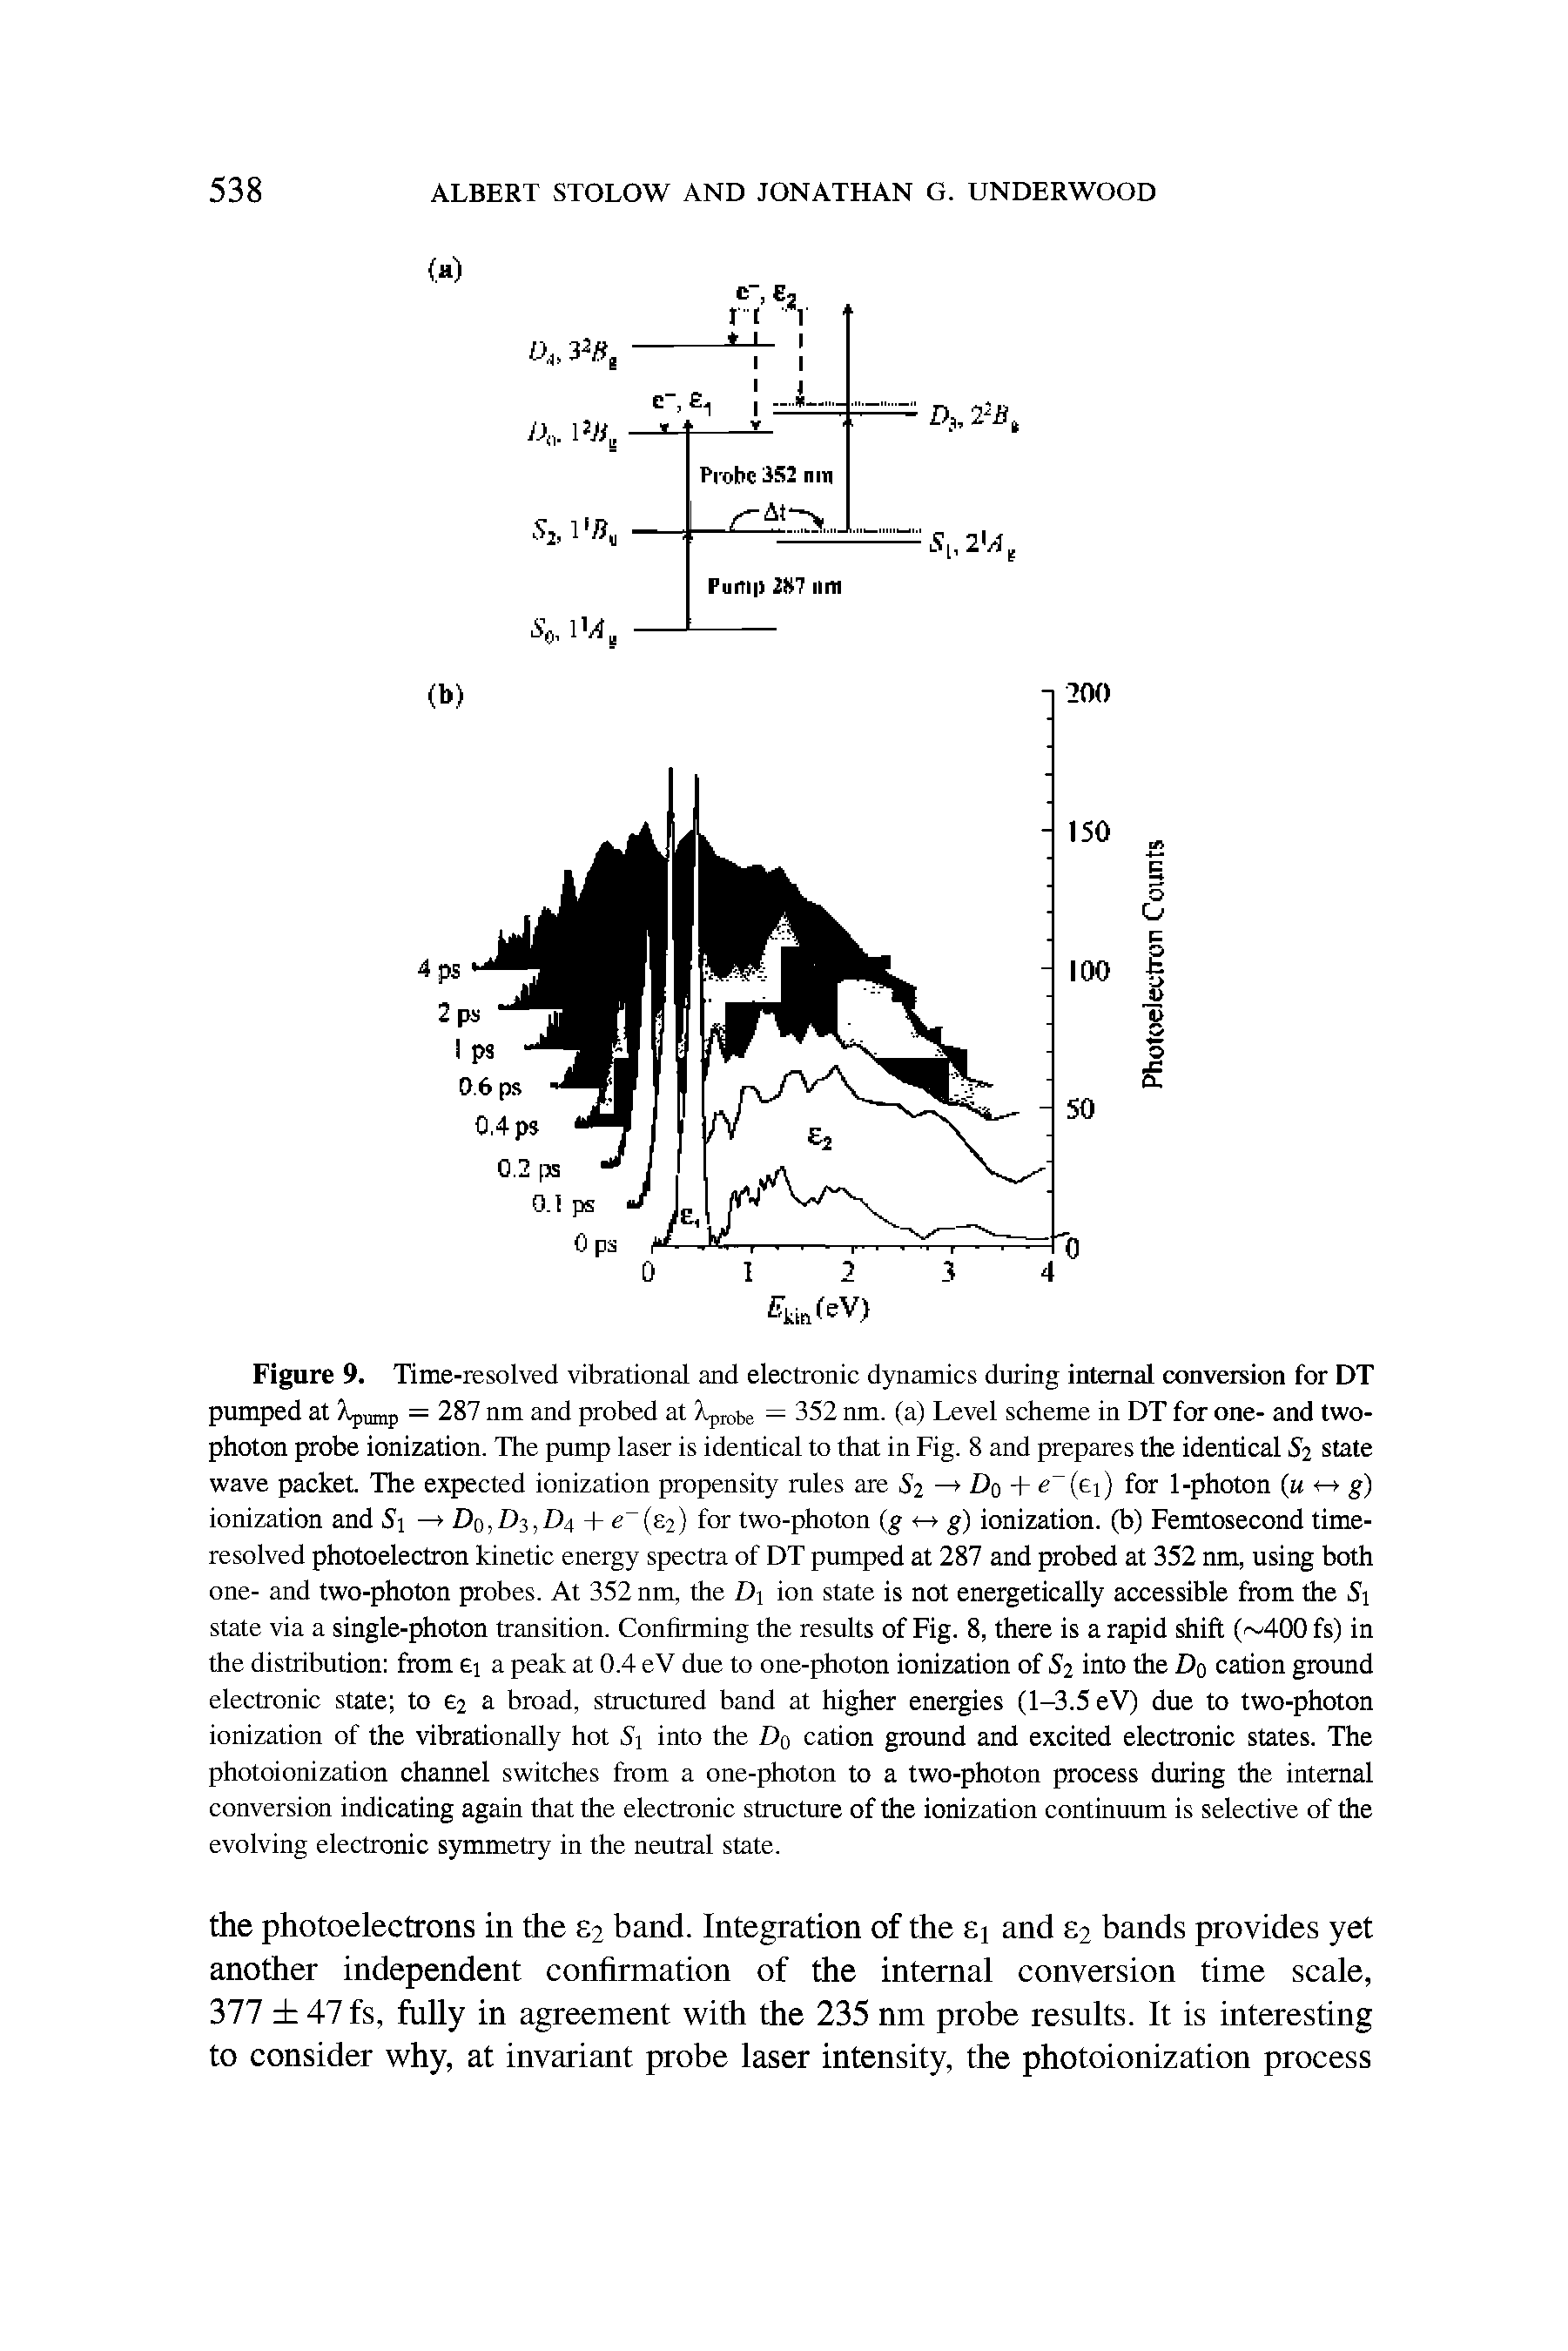 Figure 9. Time-resolved vibrational and electronic dynamics during internal conversion for DT pumped at = 287 nm and probed at Xpr0be — 352 nm. (a) Level scheme in DT for one- and two-photon probe ionization. The pump laser is identical to that in Fig. 8 and prepares the identical S2 state wave packet. The expected ionization propensity rules are 2 — Do + for 1-photon (u - g)...